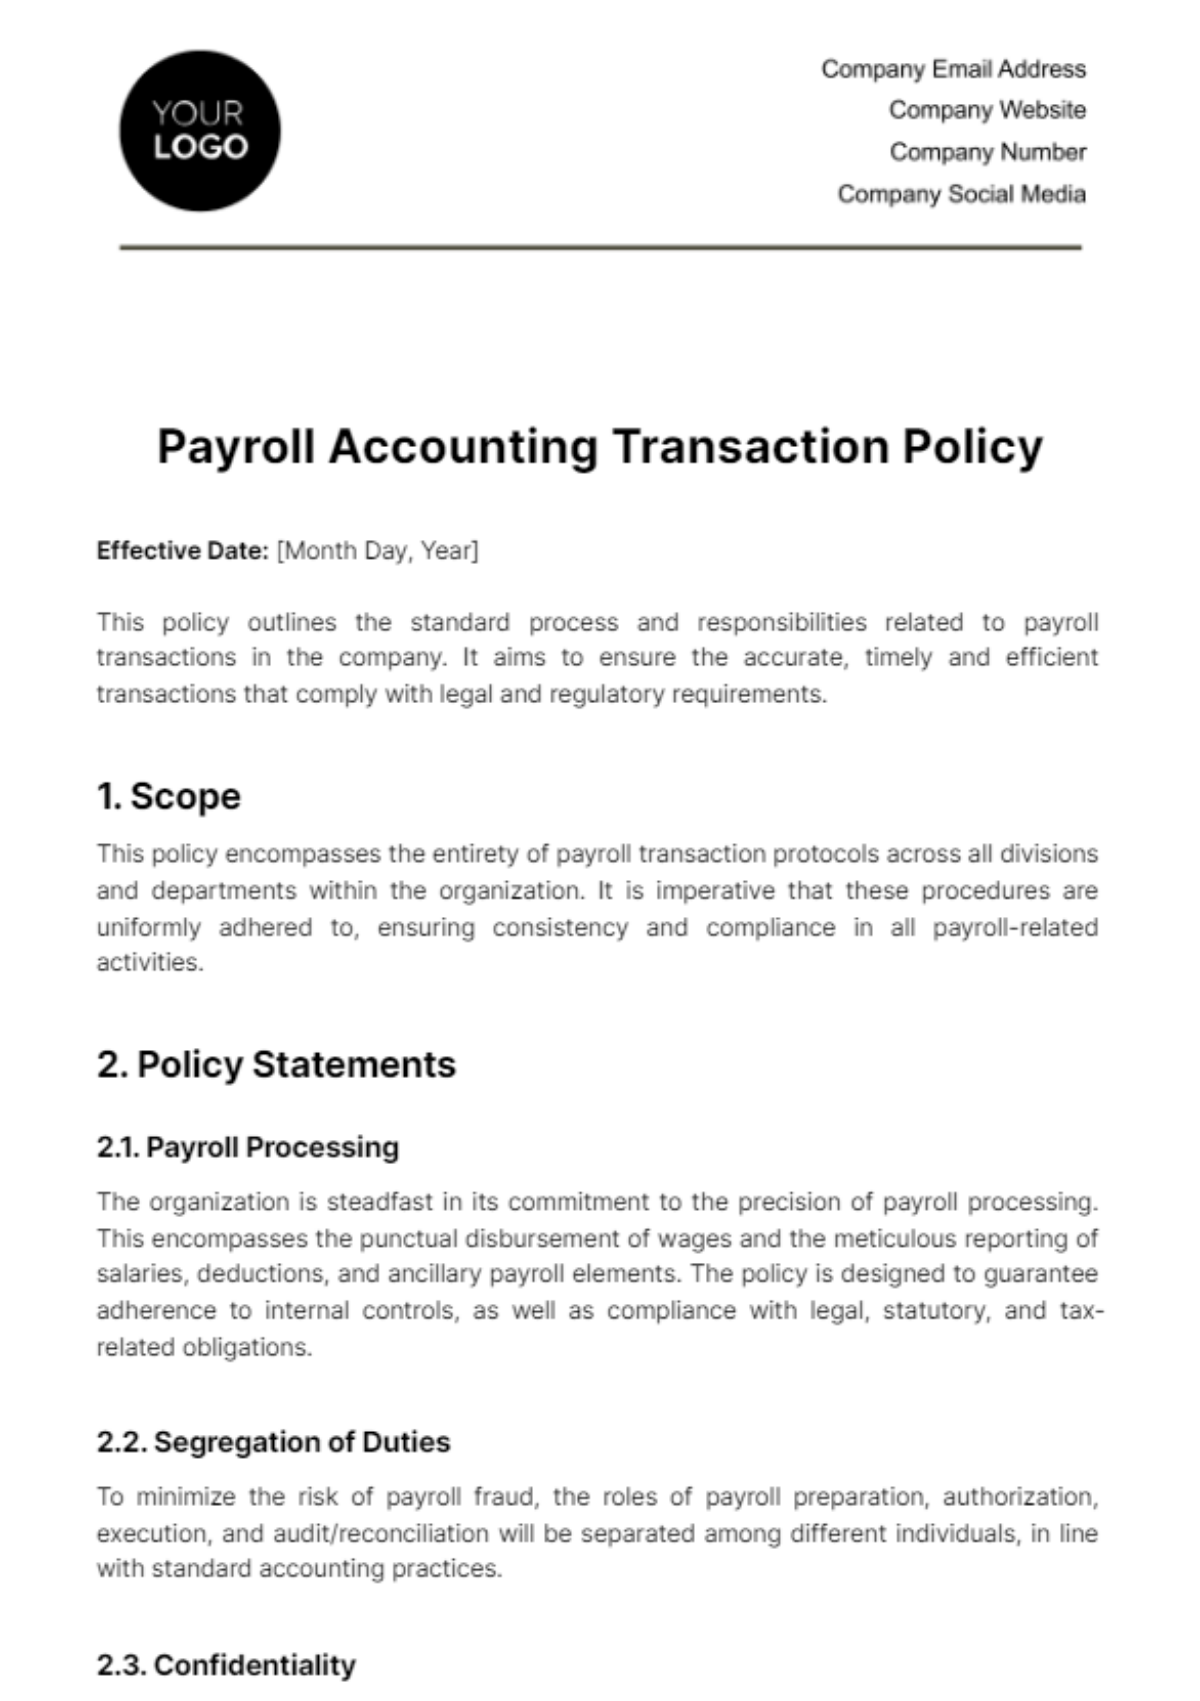 Payroll Accounting Transaction Policy Template